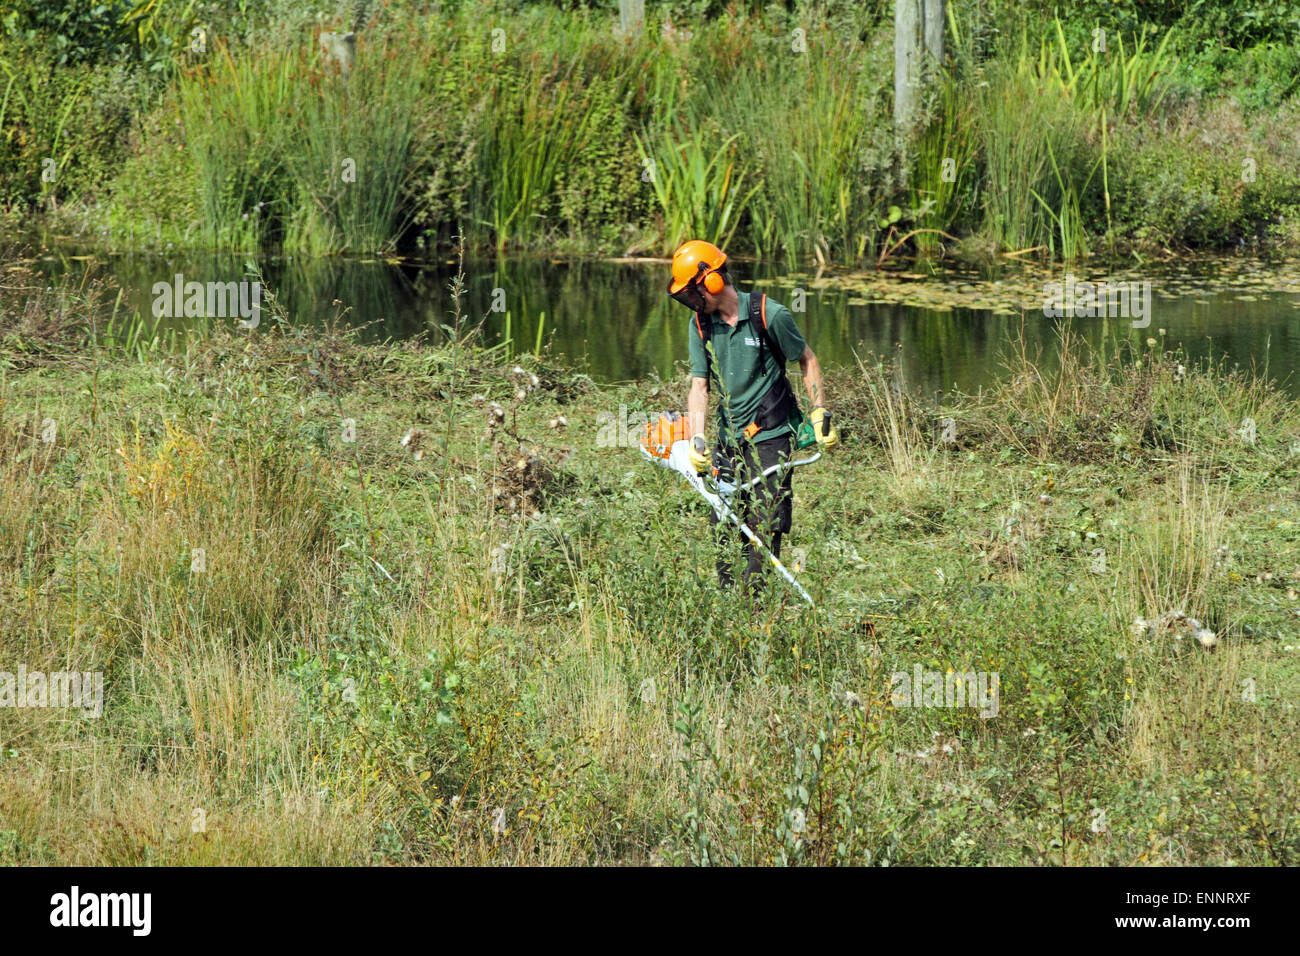 Worker strimming back weeds on a nature reserve. Stock Photo